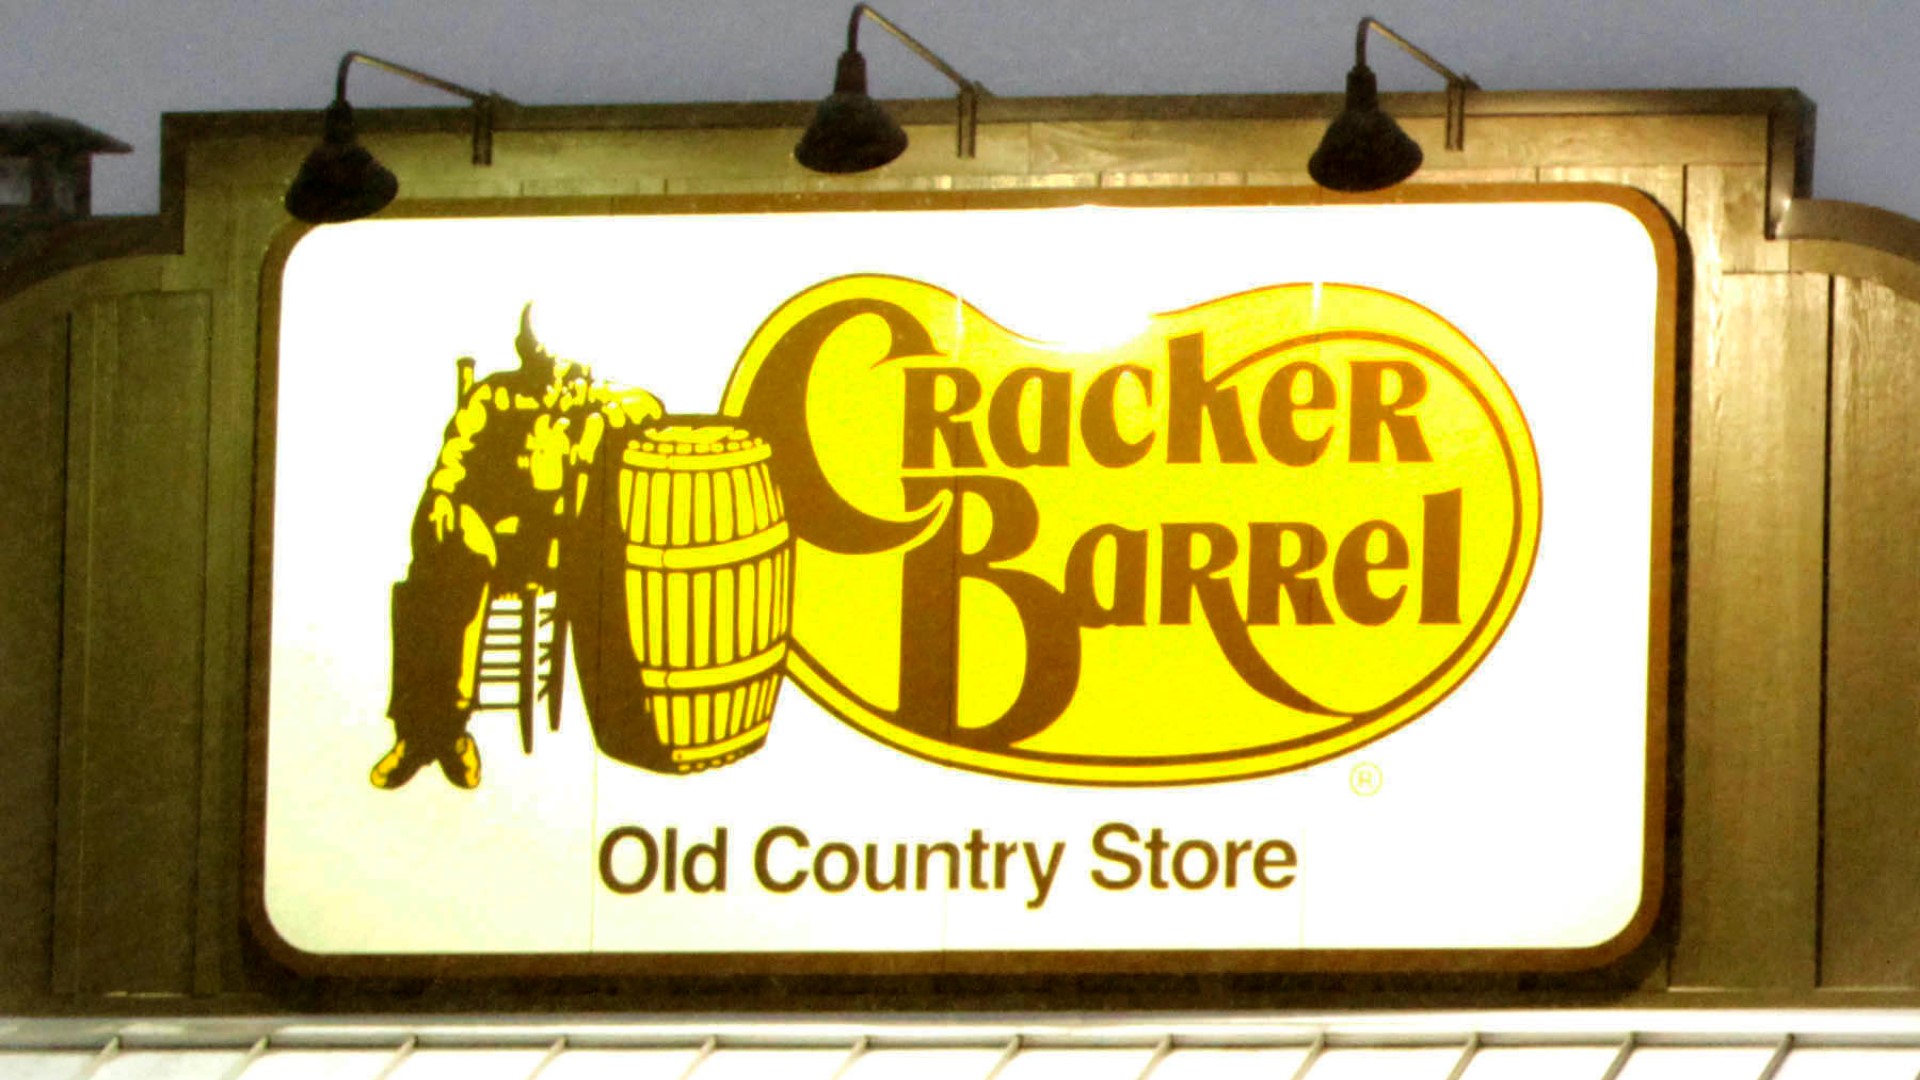 It’s a big day for southern food lovers in the Rocklin area! The newest Cracker Barrel restaurant in Northern California made its grand opening on Monday.